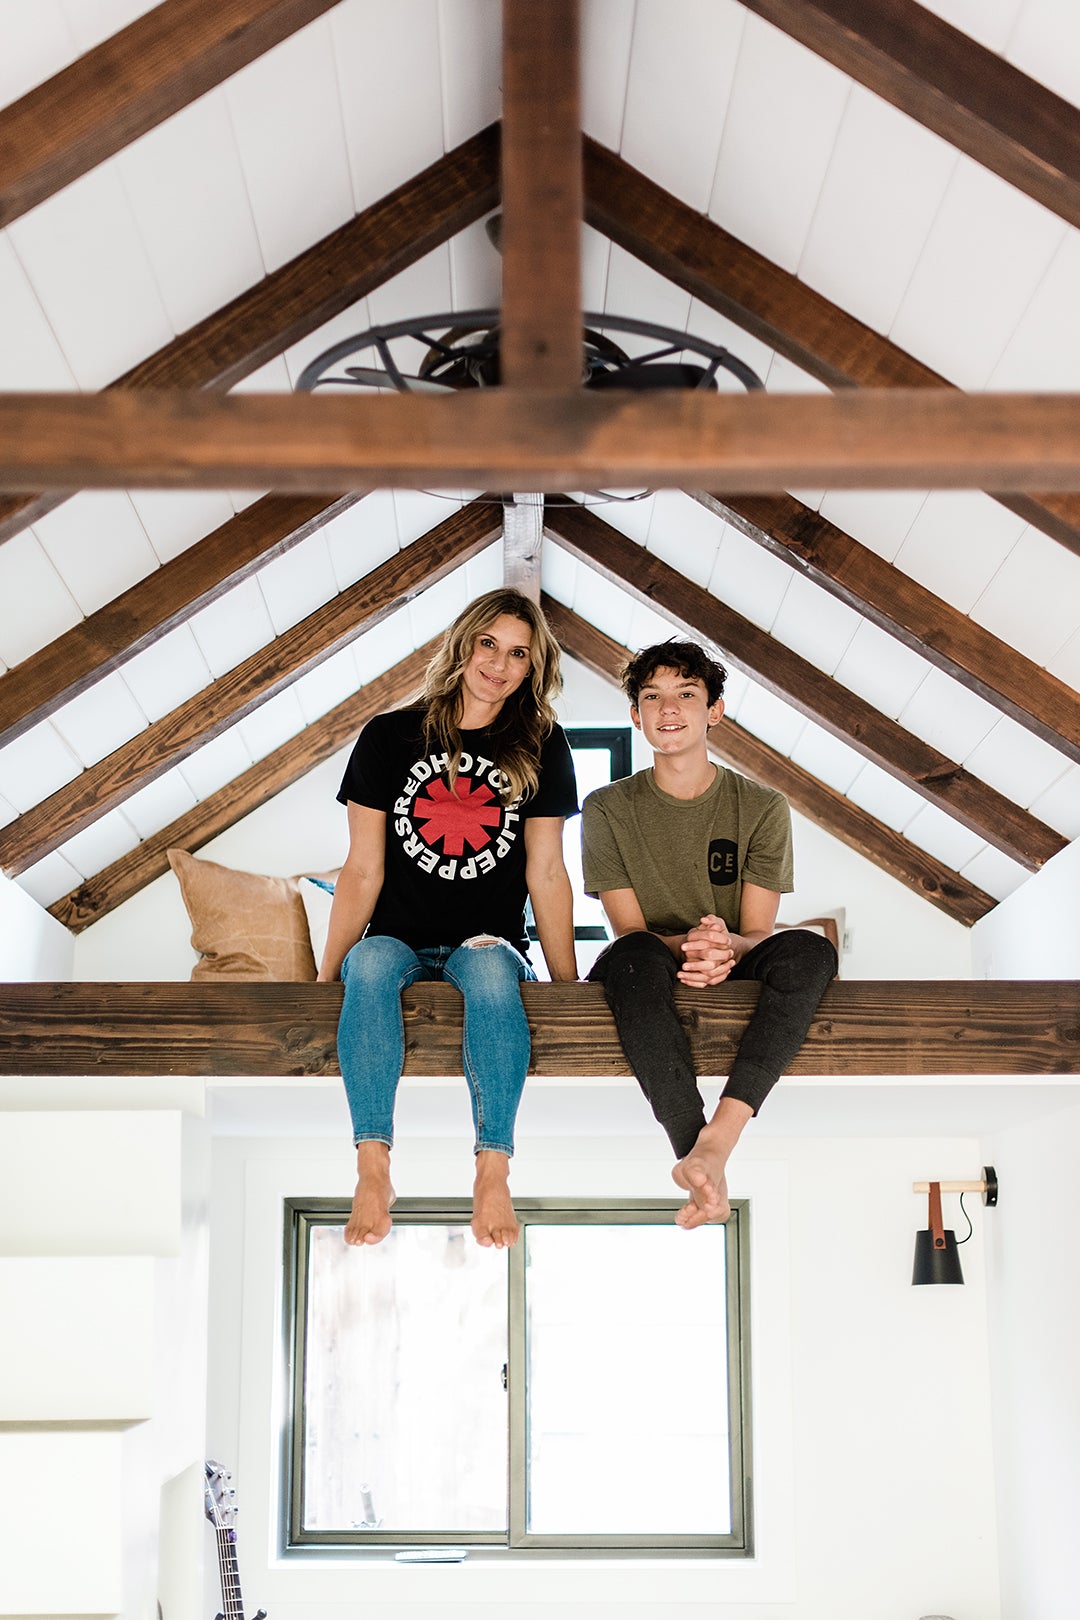 Designer Lisa Furtado and her teen son Mason sitting in the airy bunkhouse they built together.